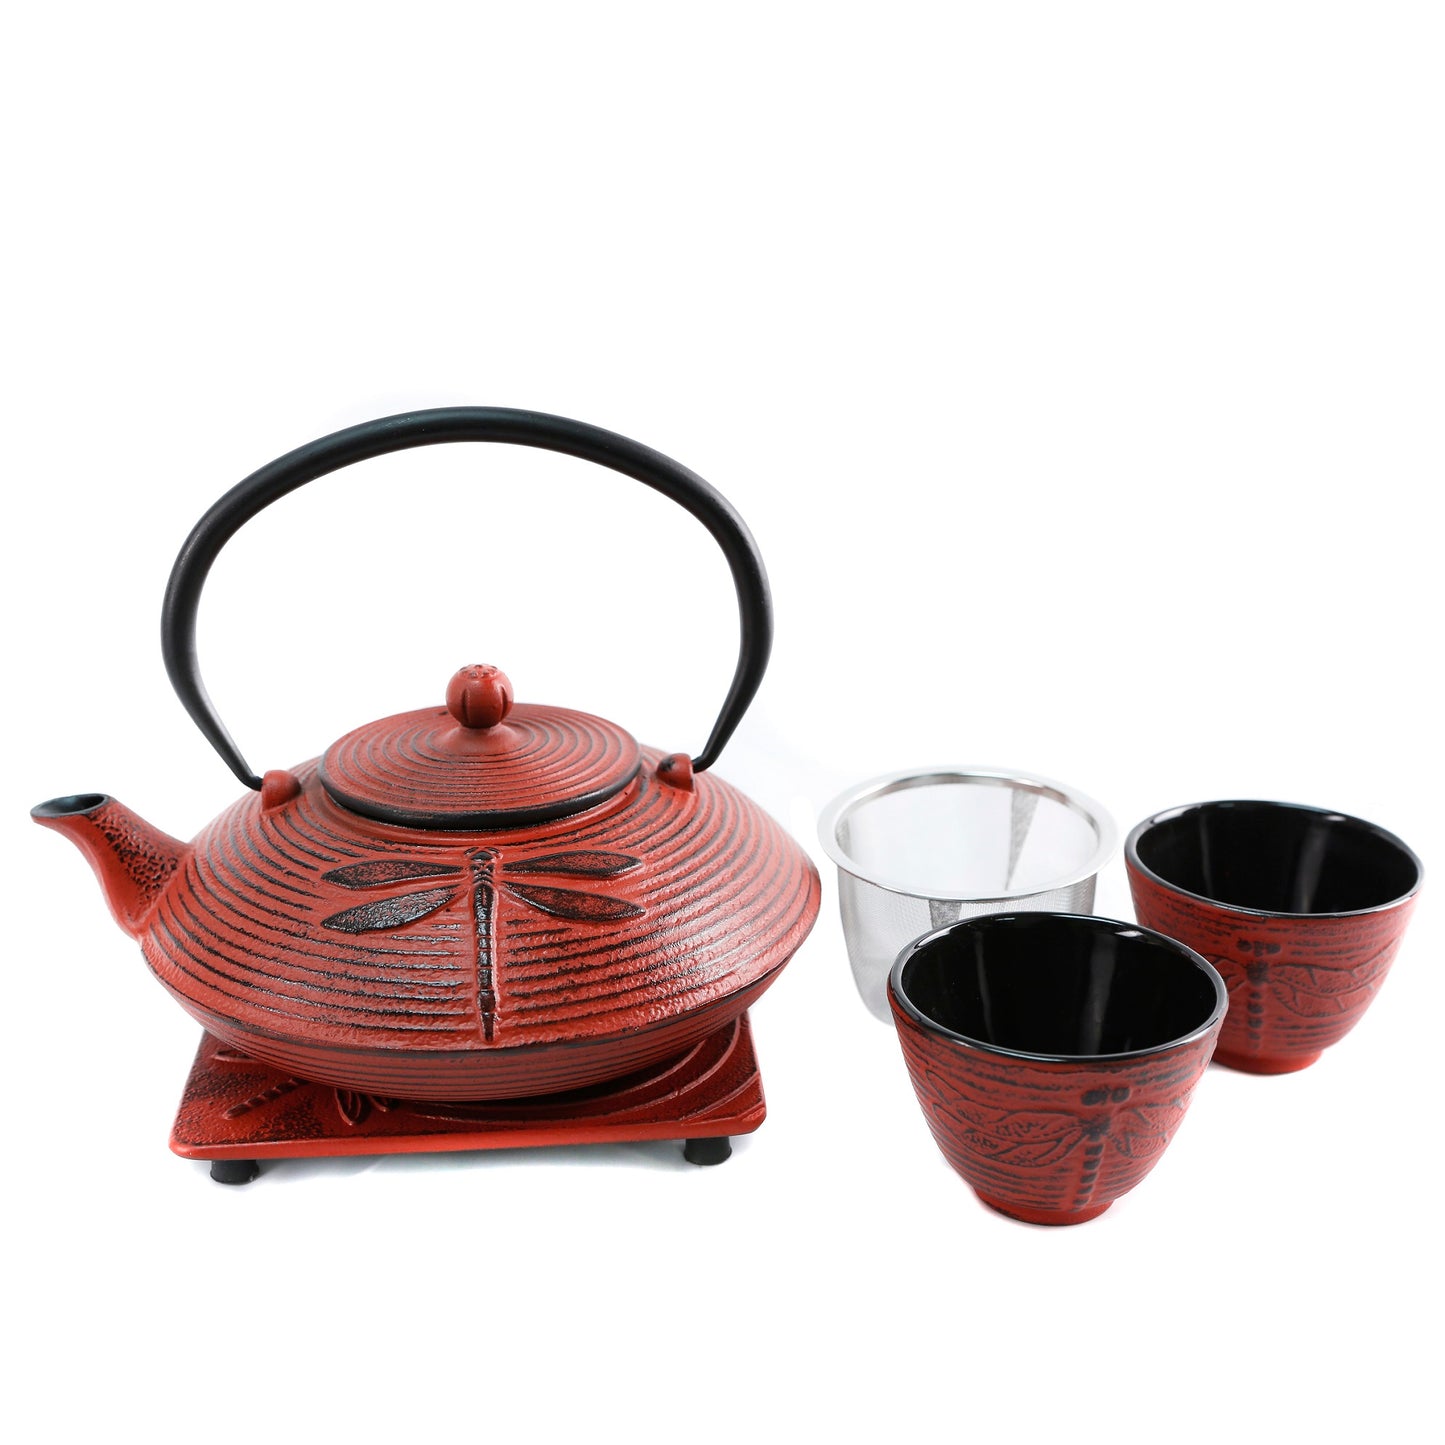 Dragonfly set with 2 cups 800ml (27oz)